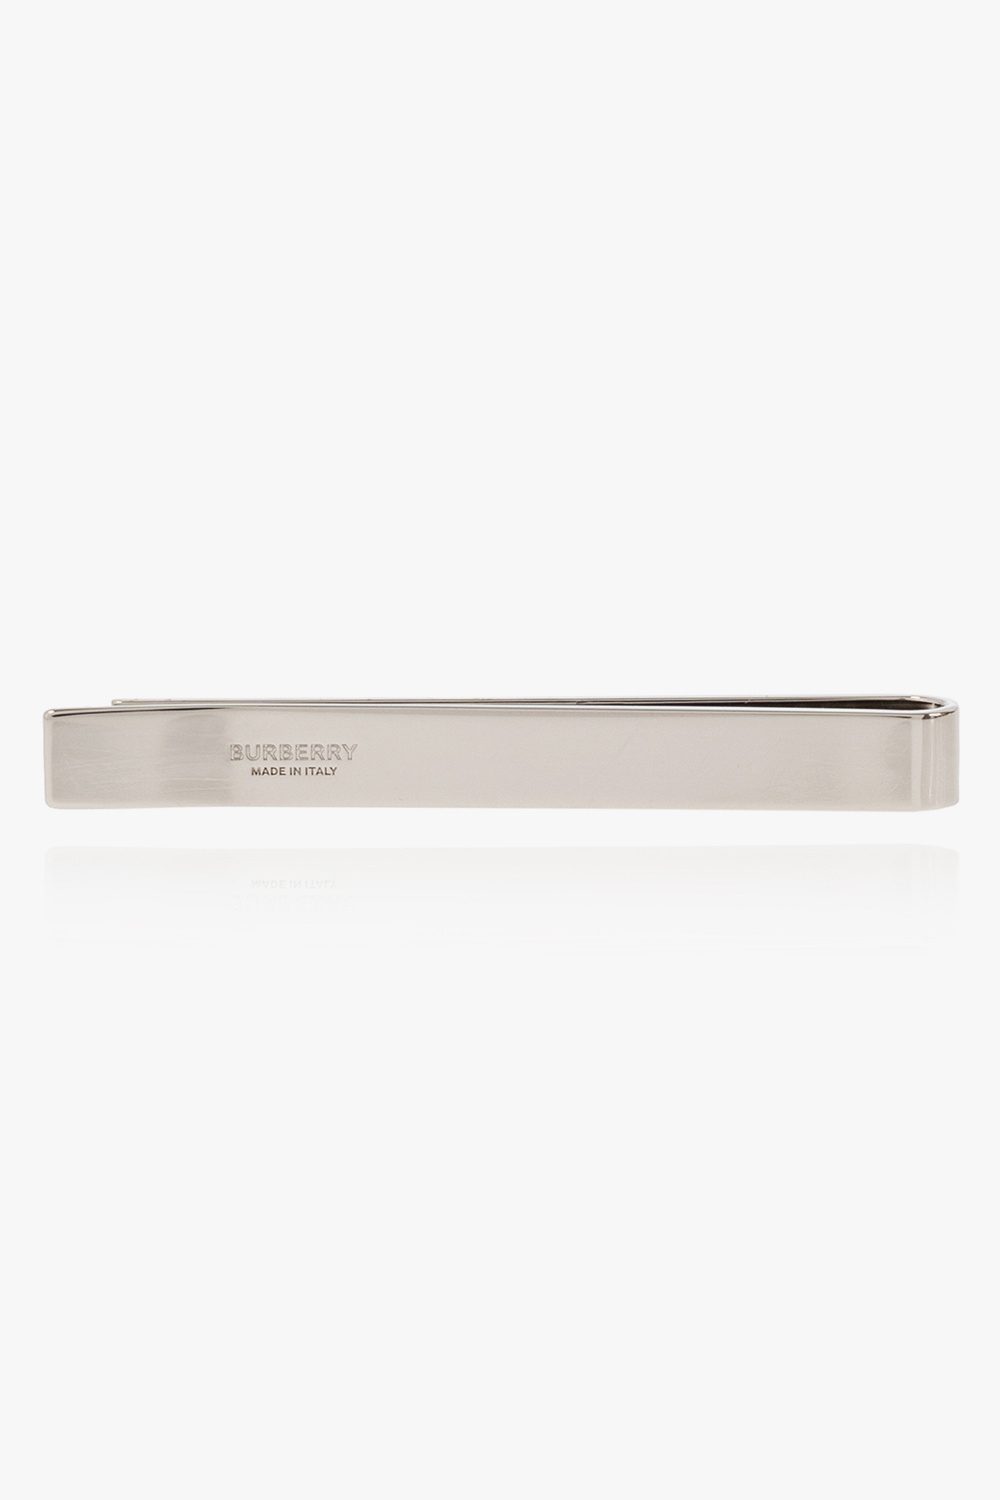 Burberry Check Engraved Tie Bar, Silver